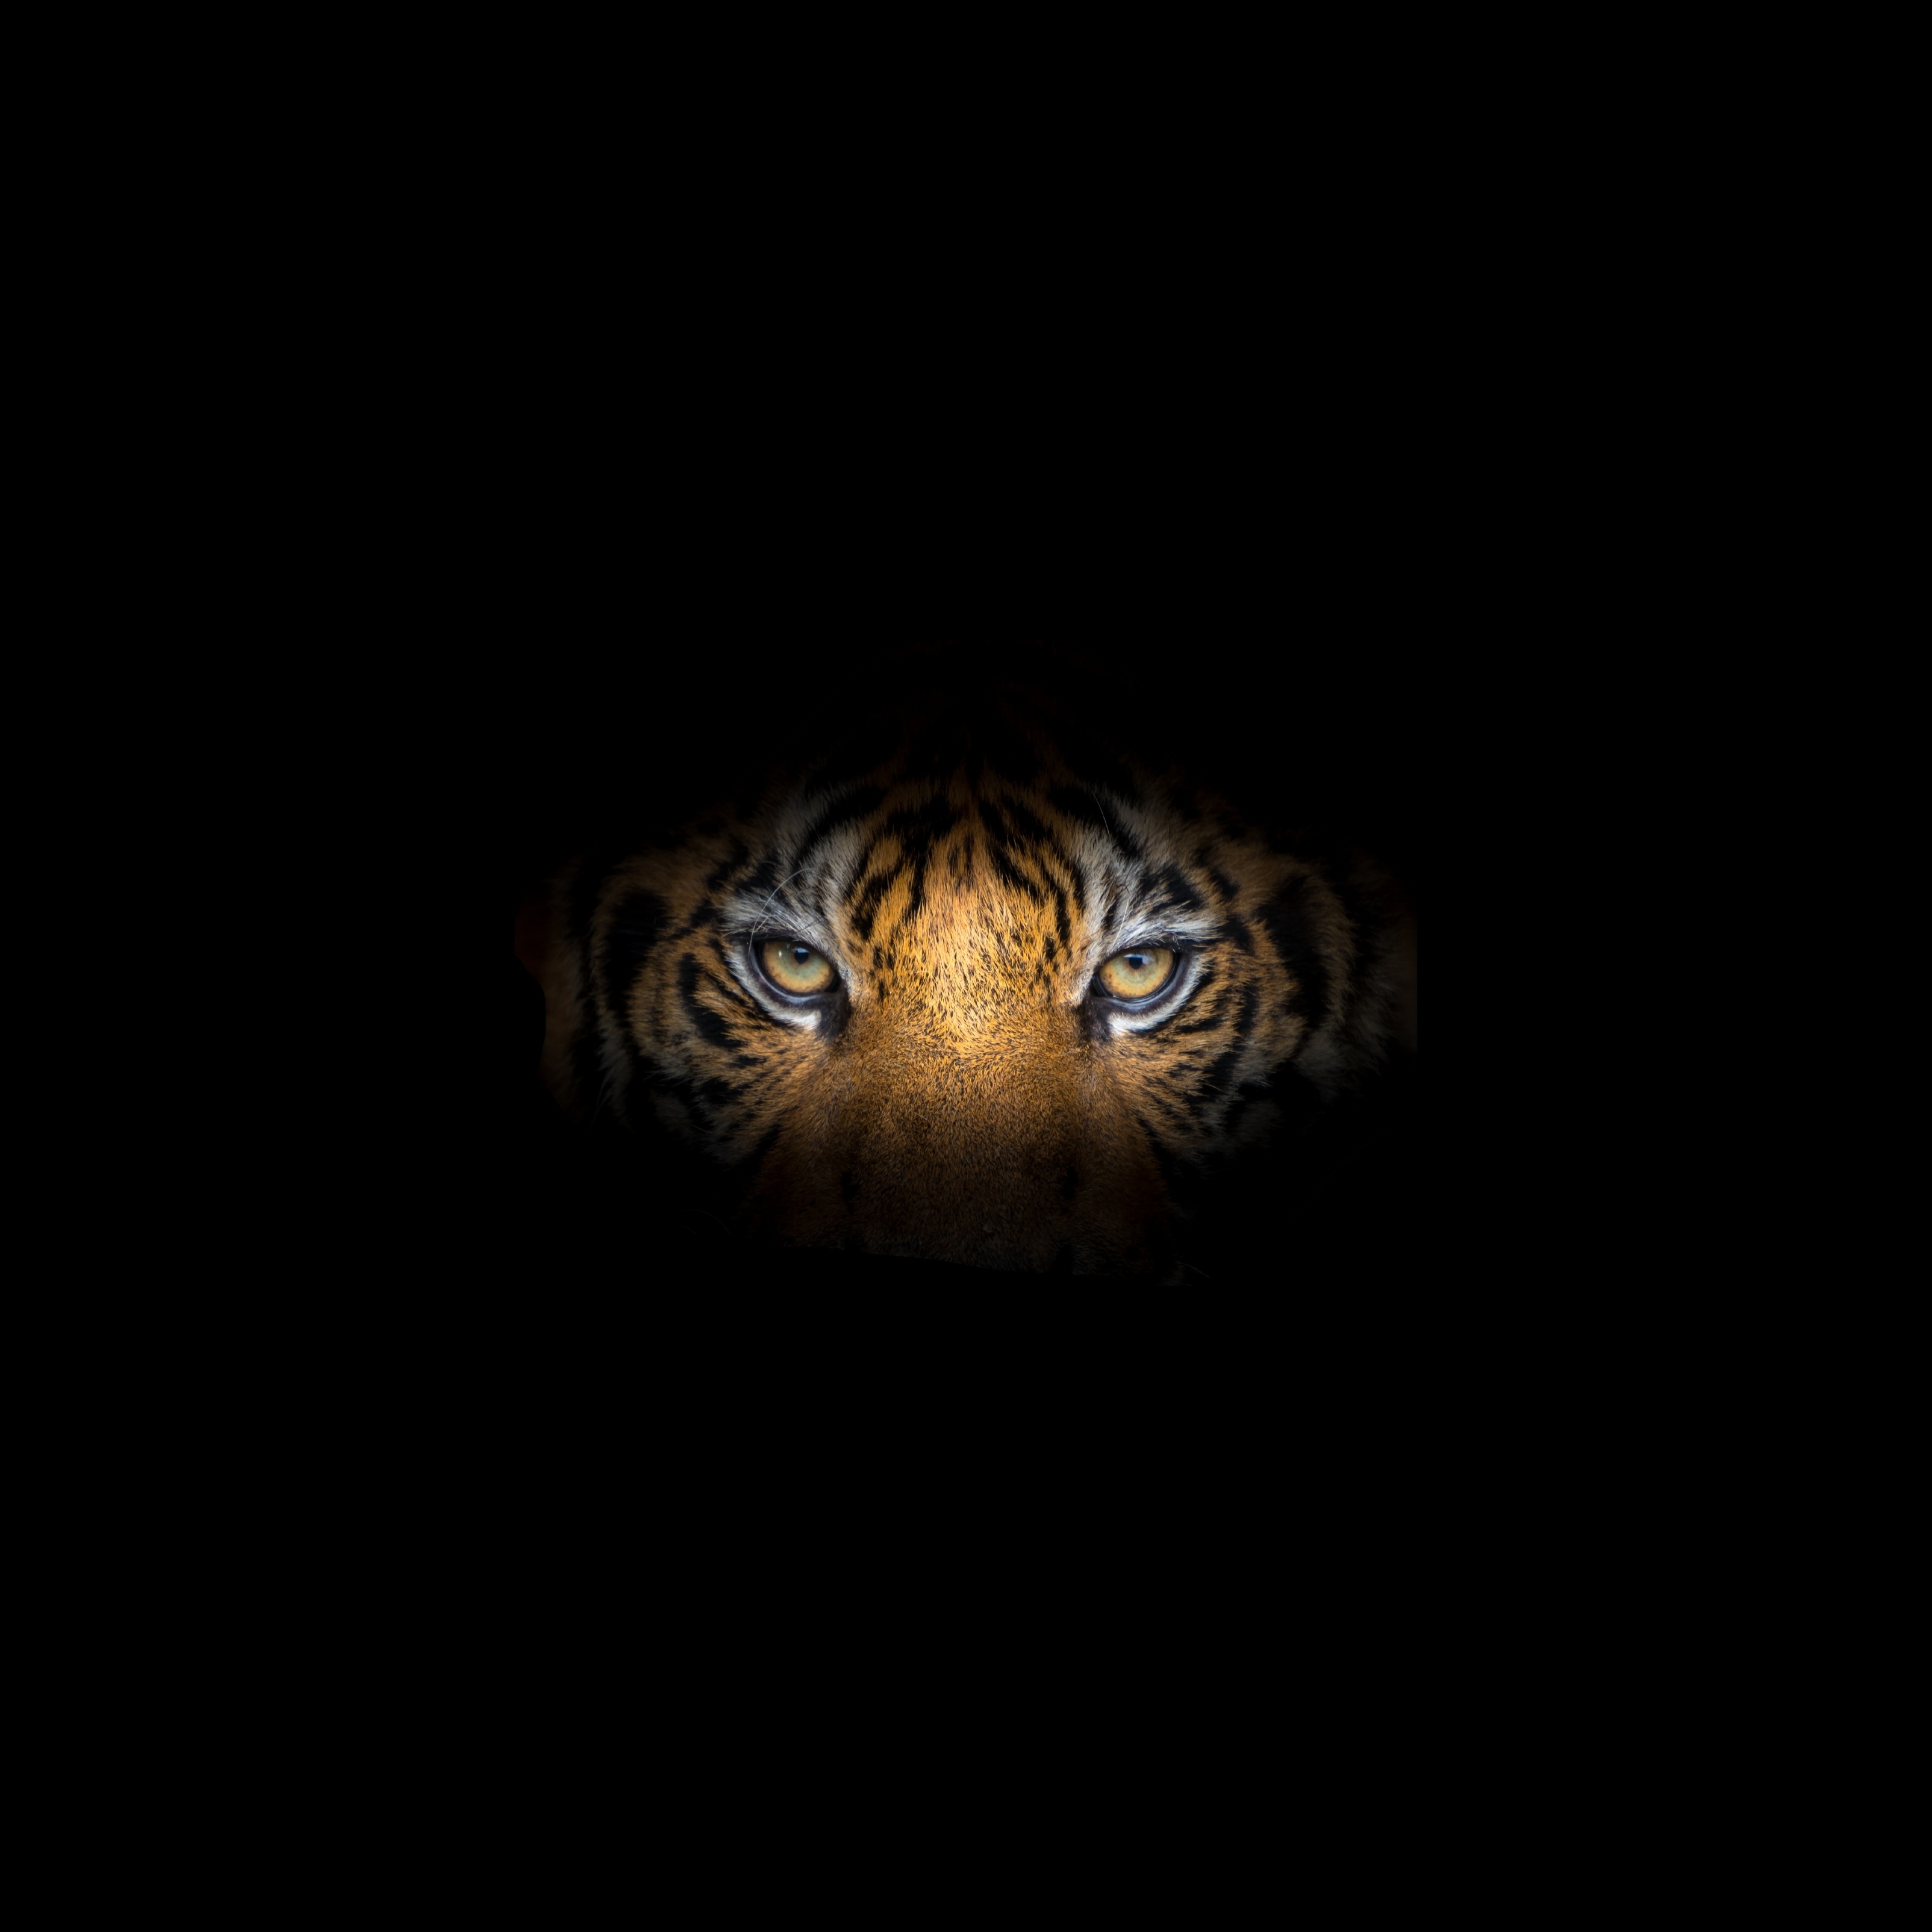 iPad Wallpapers Tiger Face Black Background iPad Wallpaper 3208x3208 px